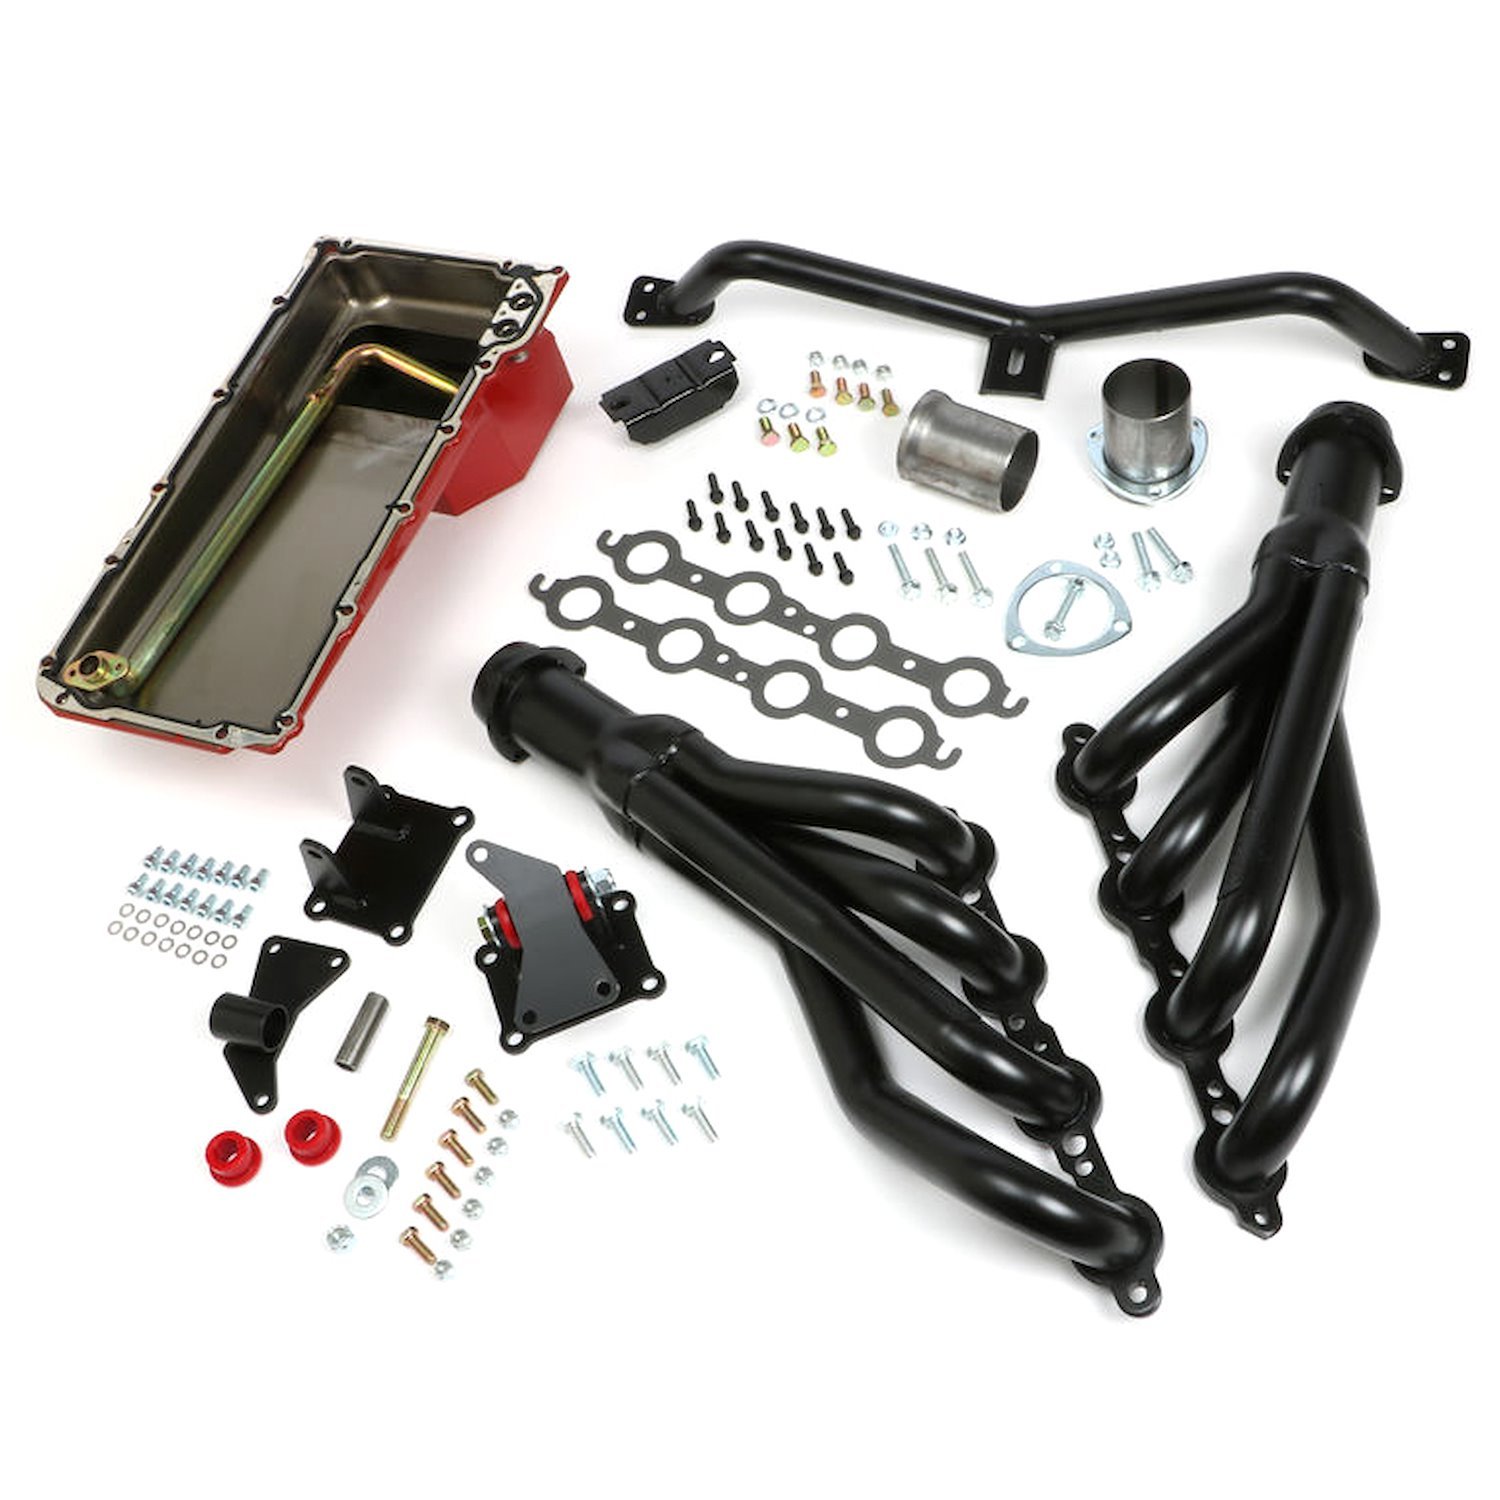 42051 Engine Swap-In-A-Box Kit for GM LS Engine and Automatic Transmission, 1973-1987 GMC 2WD 1/2-3/4 Ton Trucks, Suburbans (Non